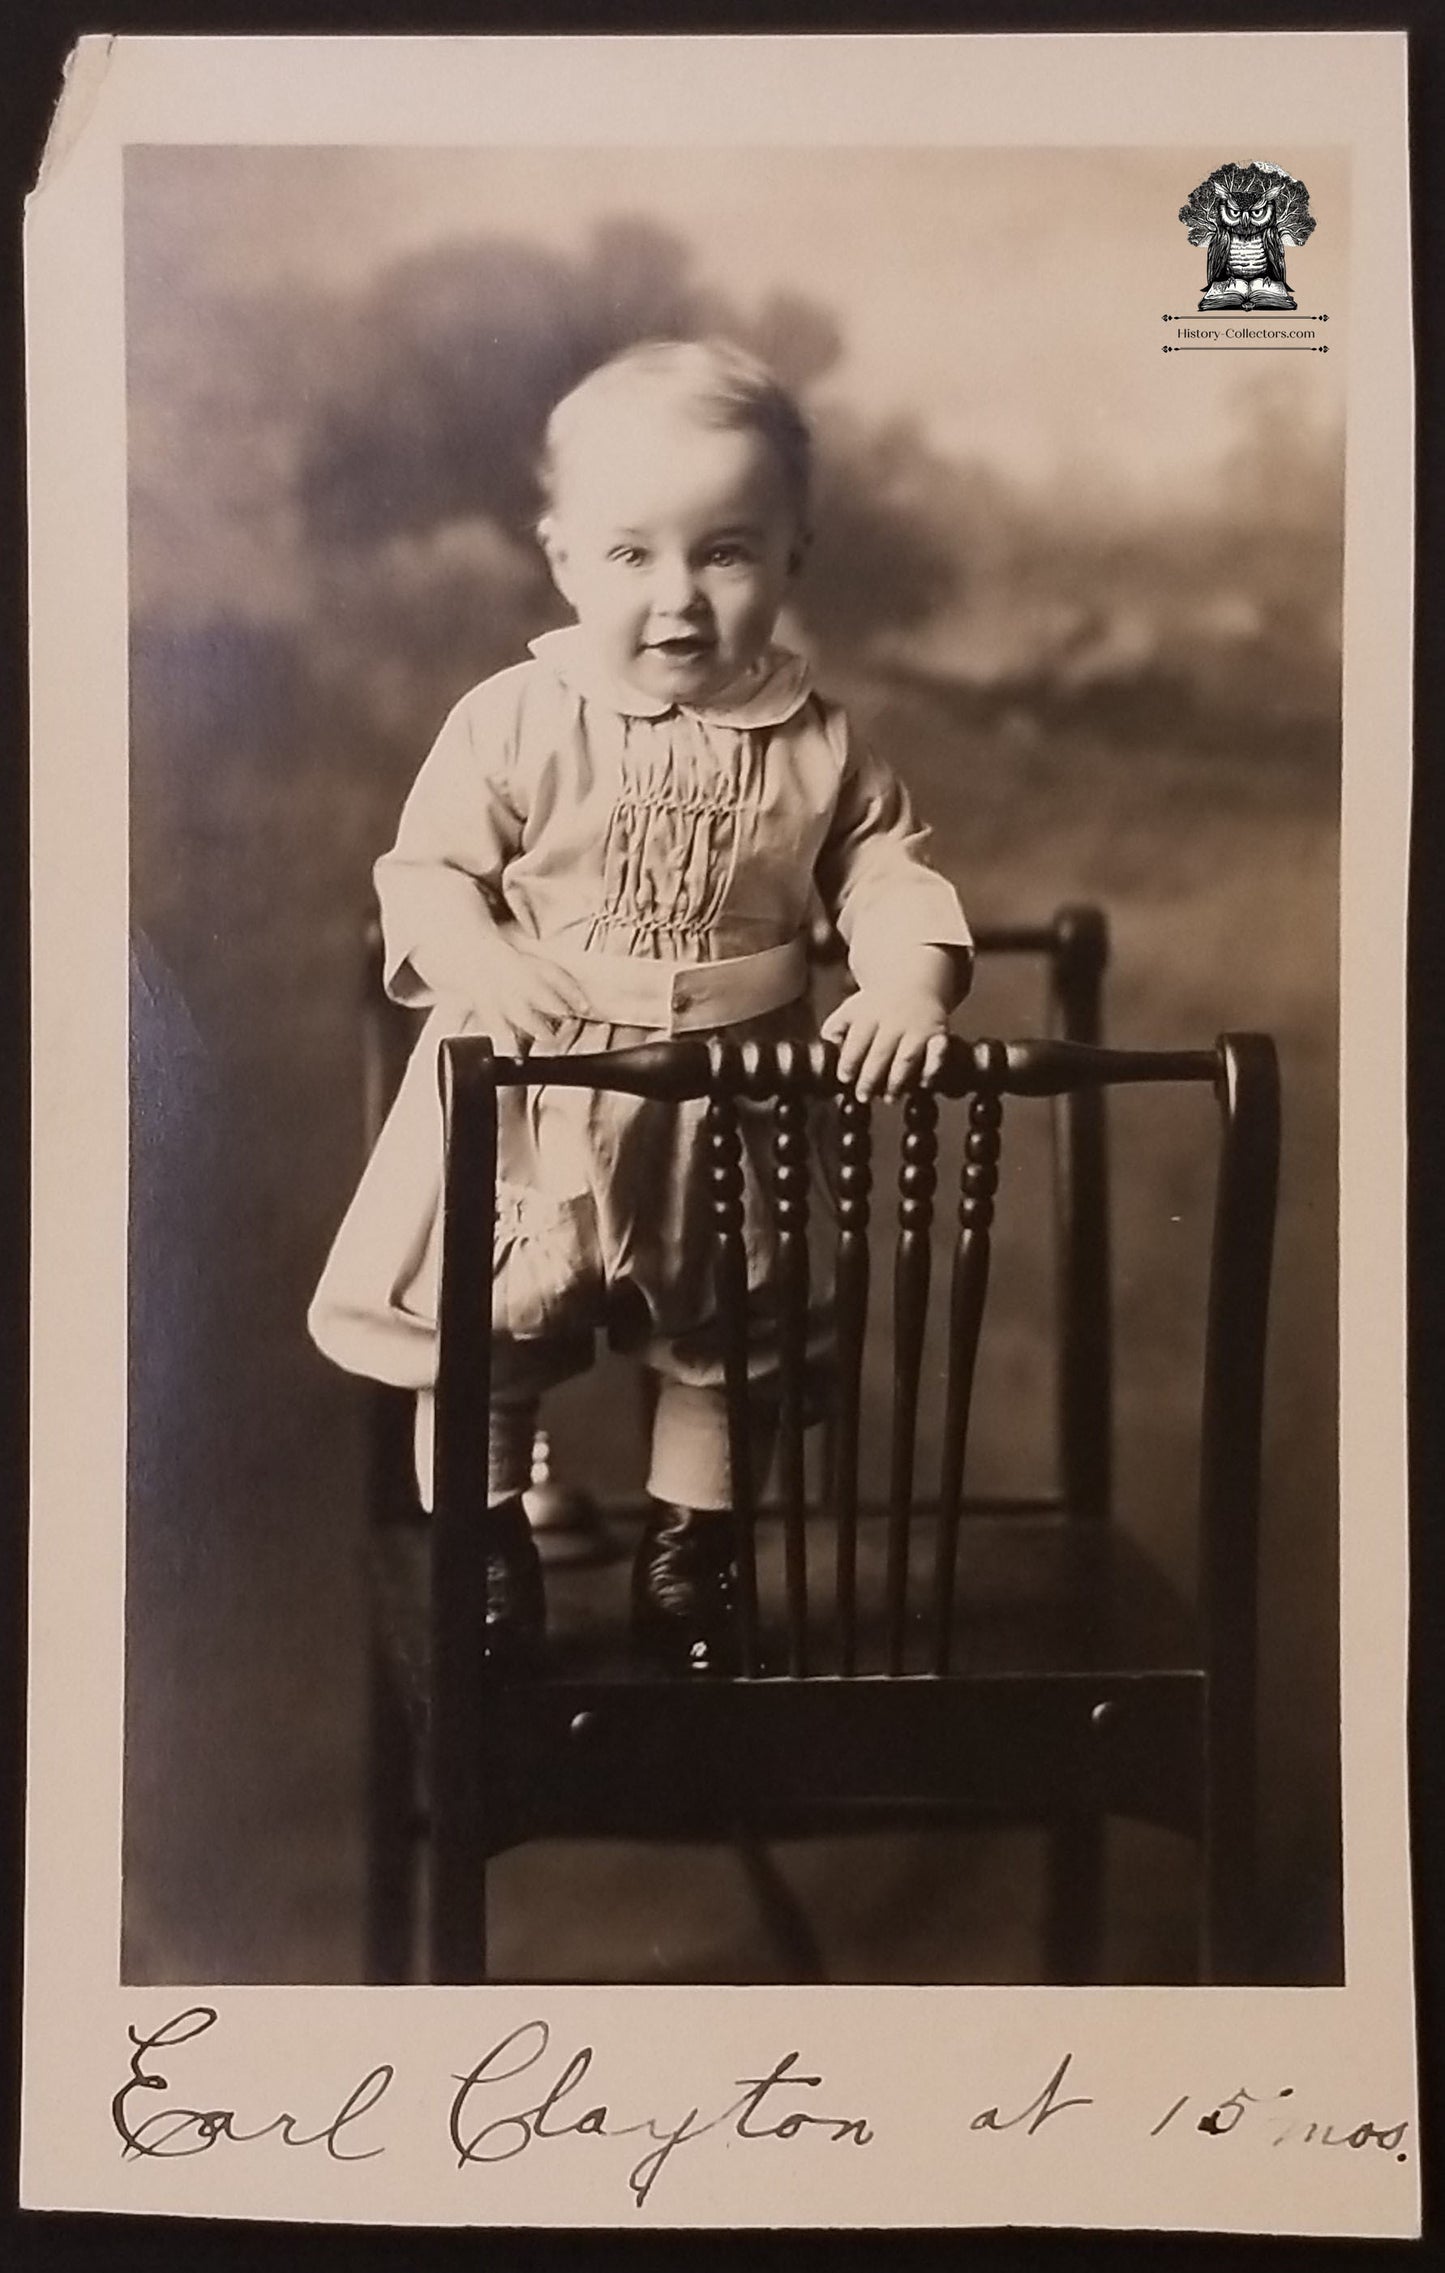 c1918 RPPC Picture Postcard - Earl Clayton 15 Months Old - Boy Child Standing on Chair - AZO Stamp Box